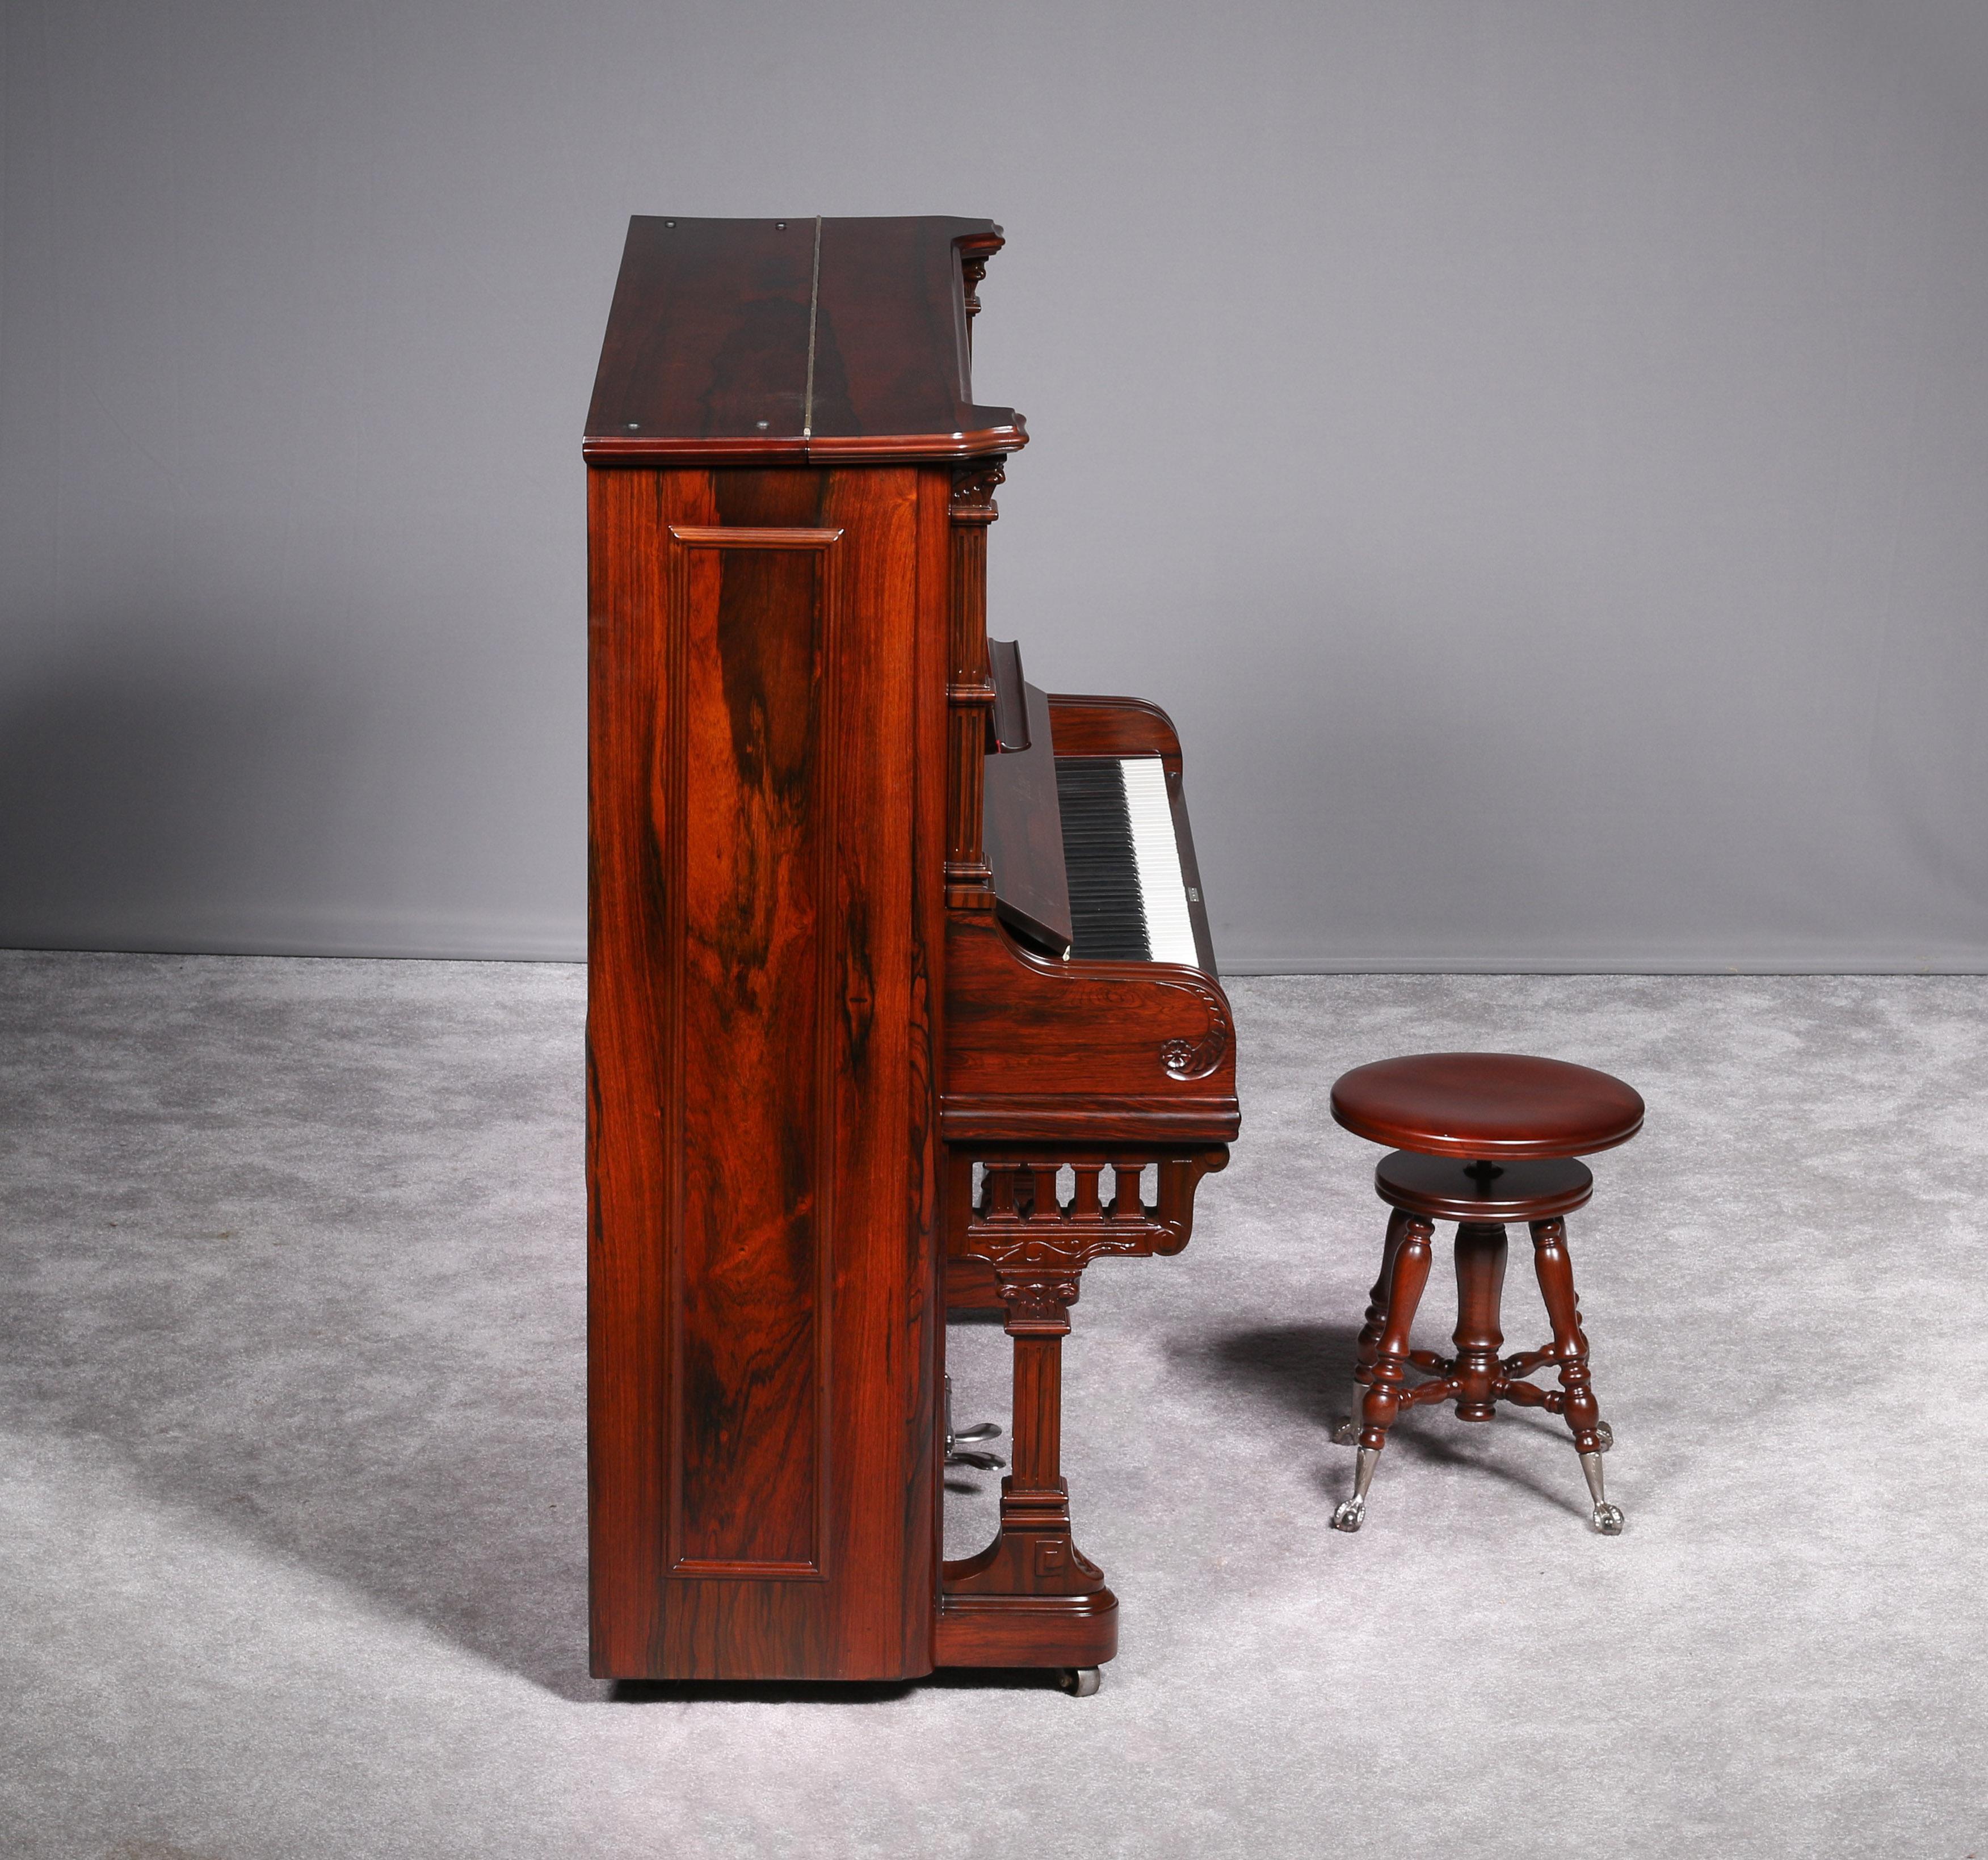 The instrument is done in a Brazilian Rosewood finish and is of the carved Victorian style. The piano has been fully restored and refinished, inside and out, and the restoration was done with a full historical perspective in mind.

1. Weight: 700